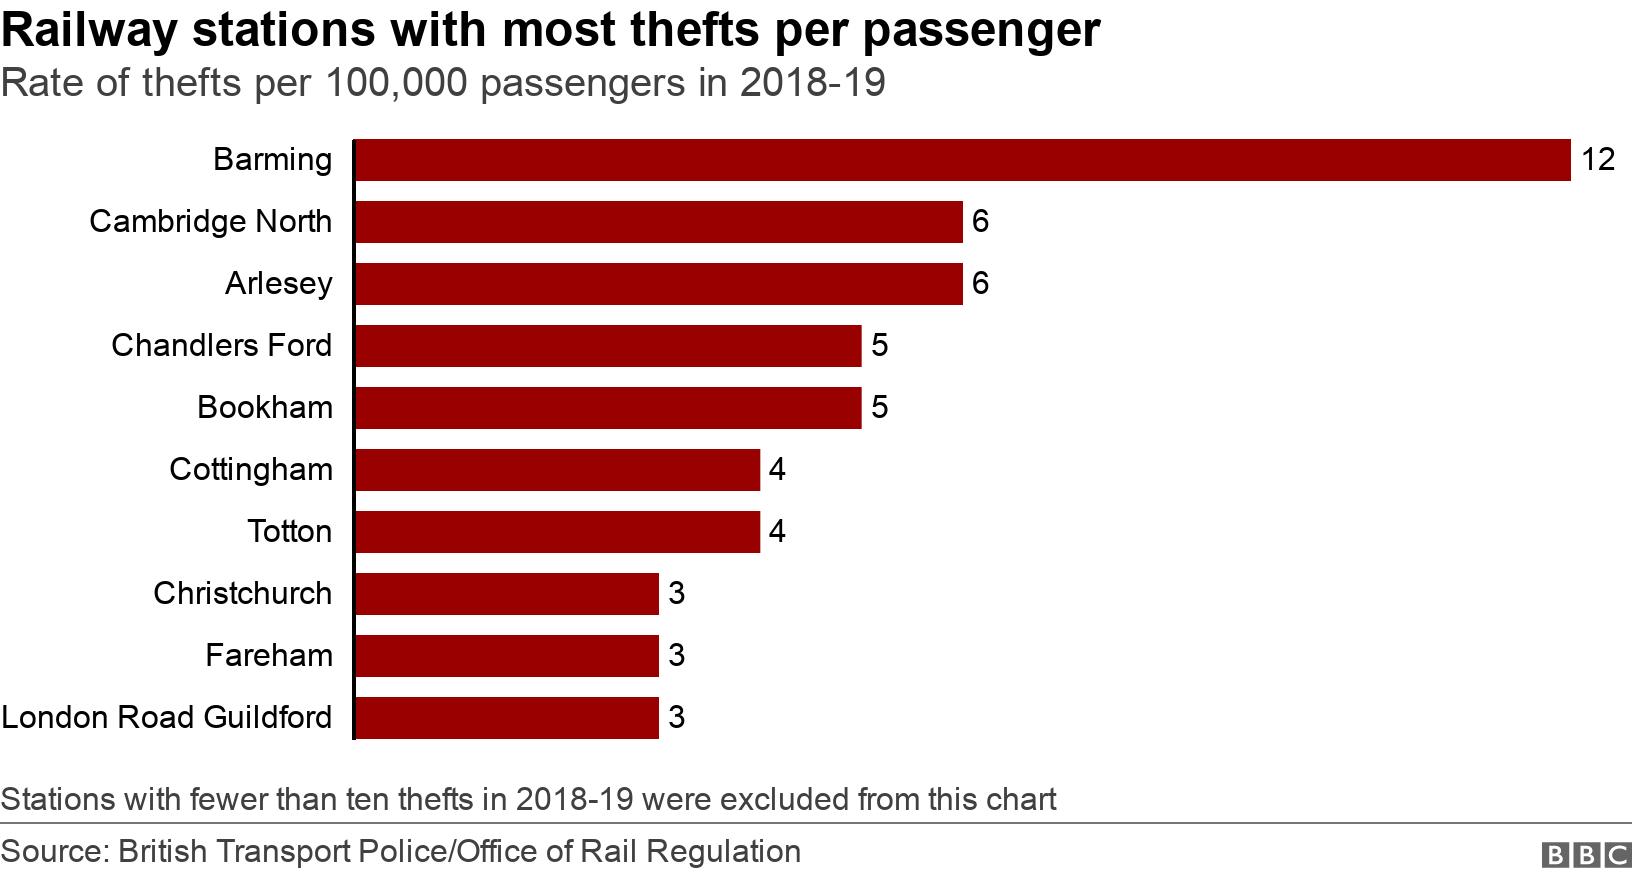 Railway stations with most thefts per passenger. Rate of thefts per 100,000 passengers in 2018-19. Stations with fewer than ten thefts in 2018-19 were excluded from this chart.